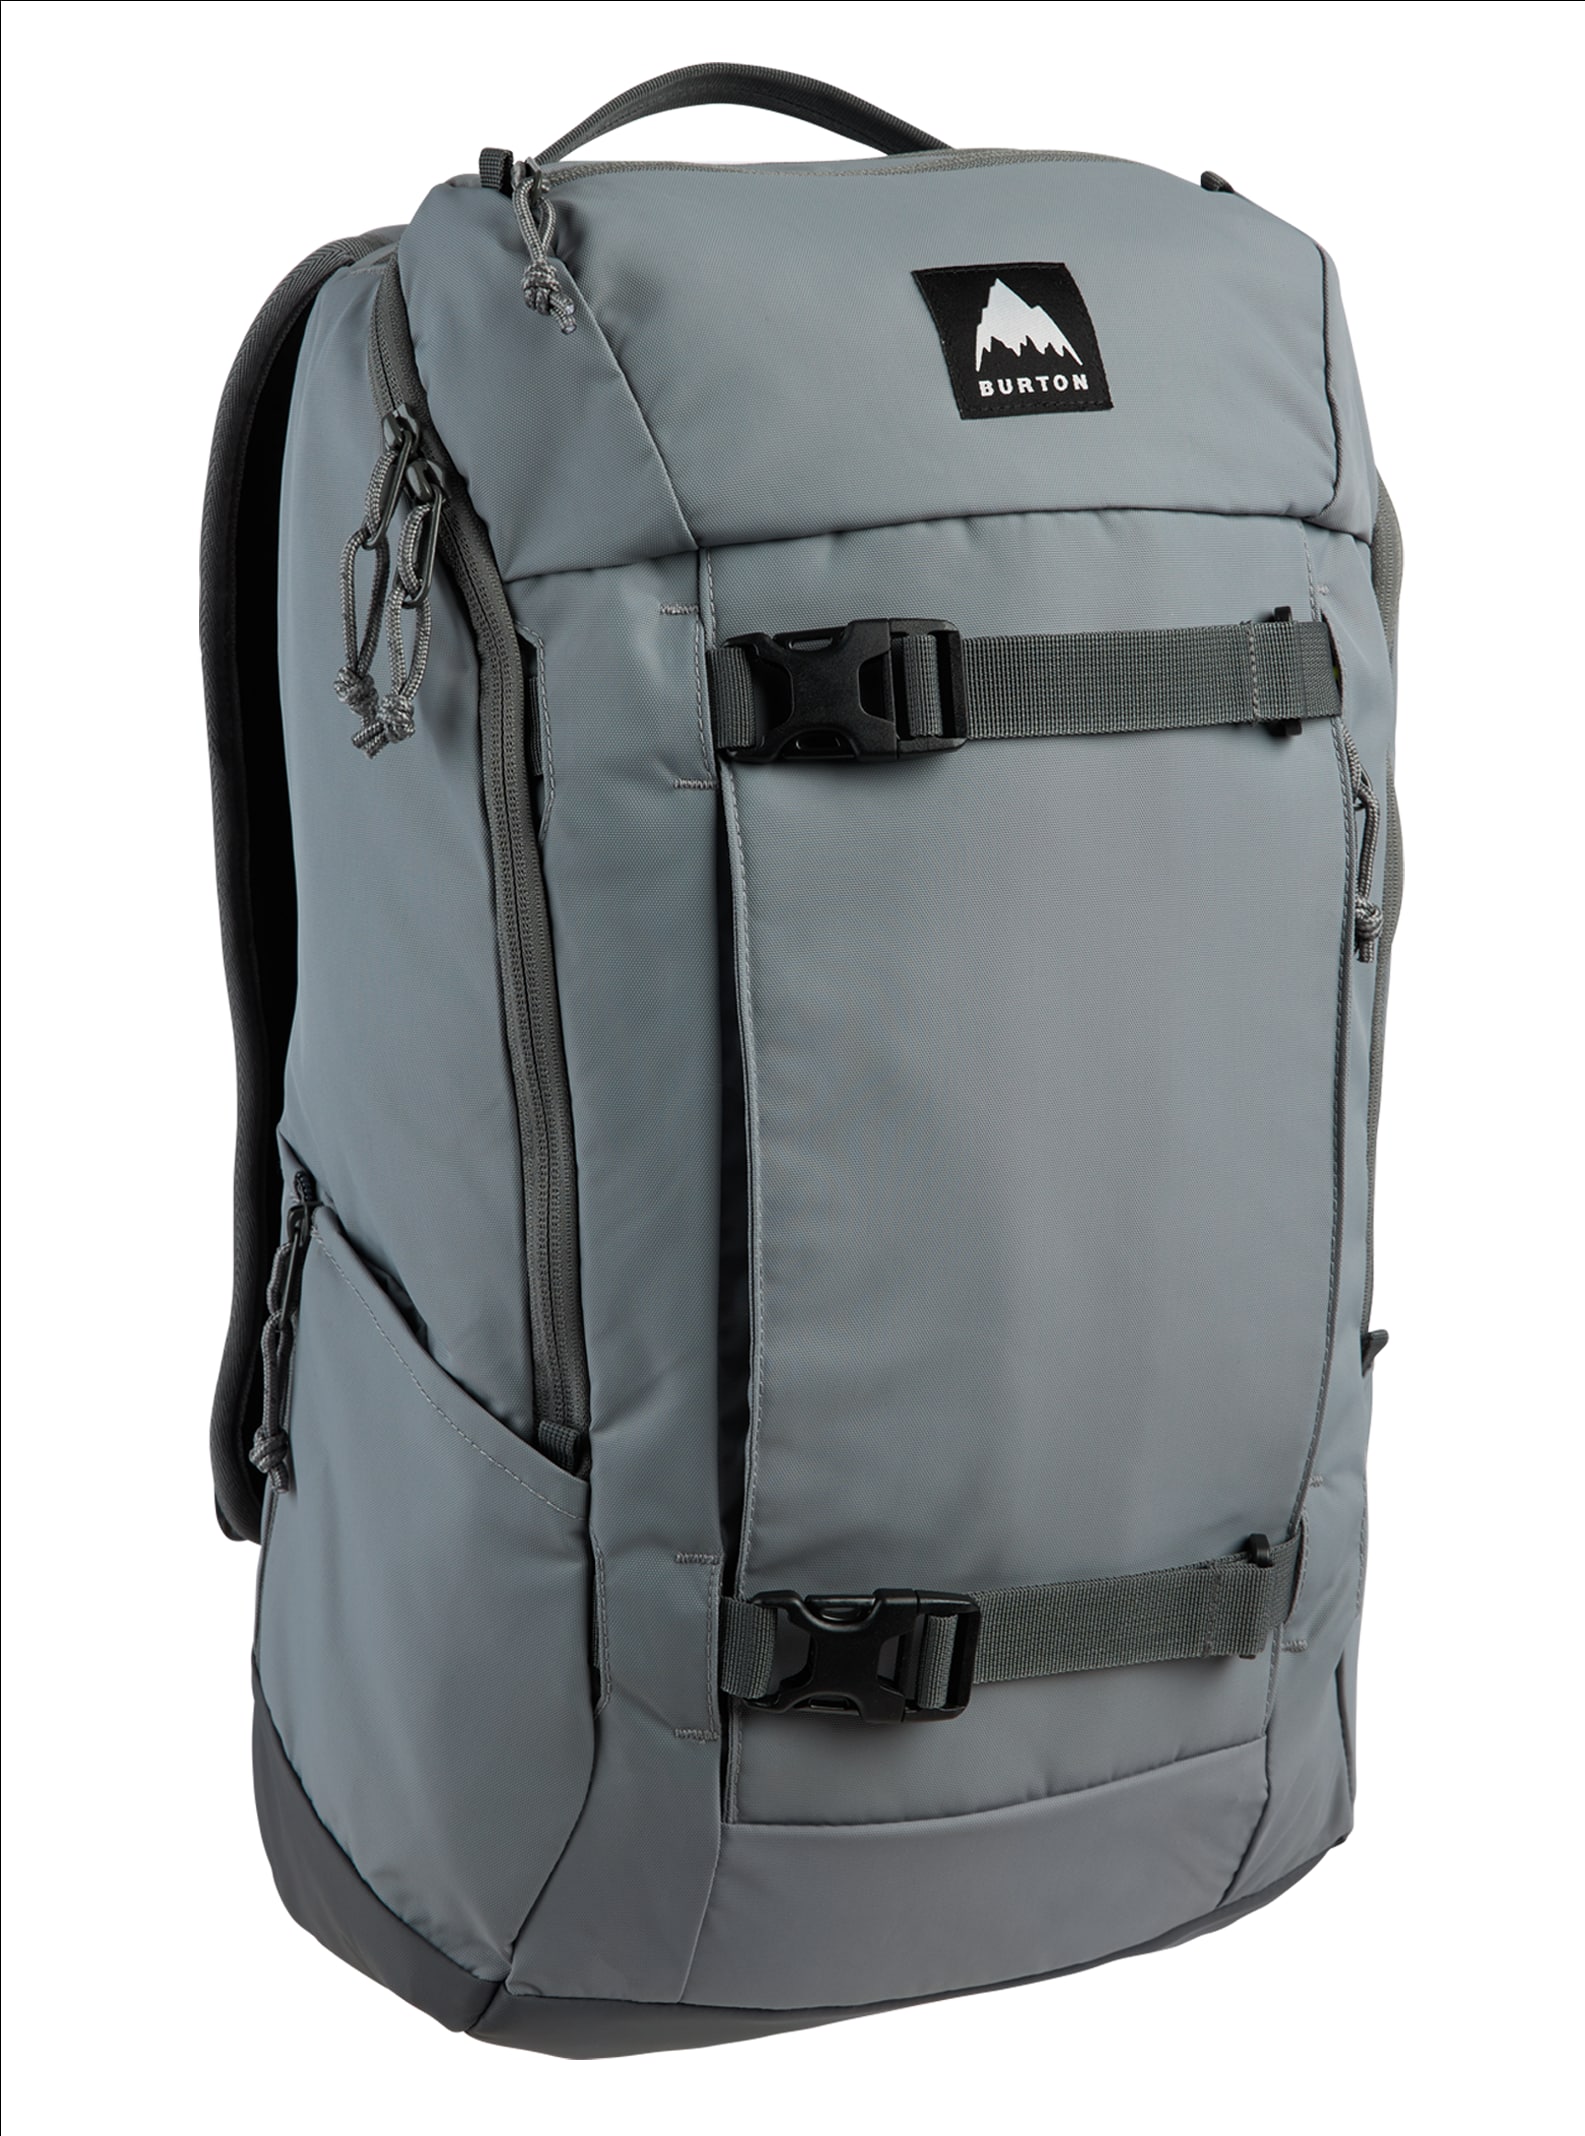 BURTON KILO PACK - COLORS AVAILABLE 27 LITERS SIZE BRAND NEW!!! 